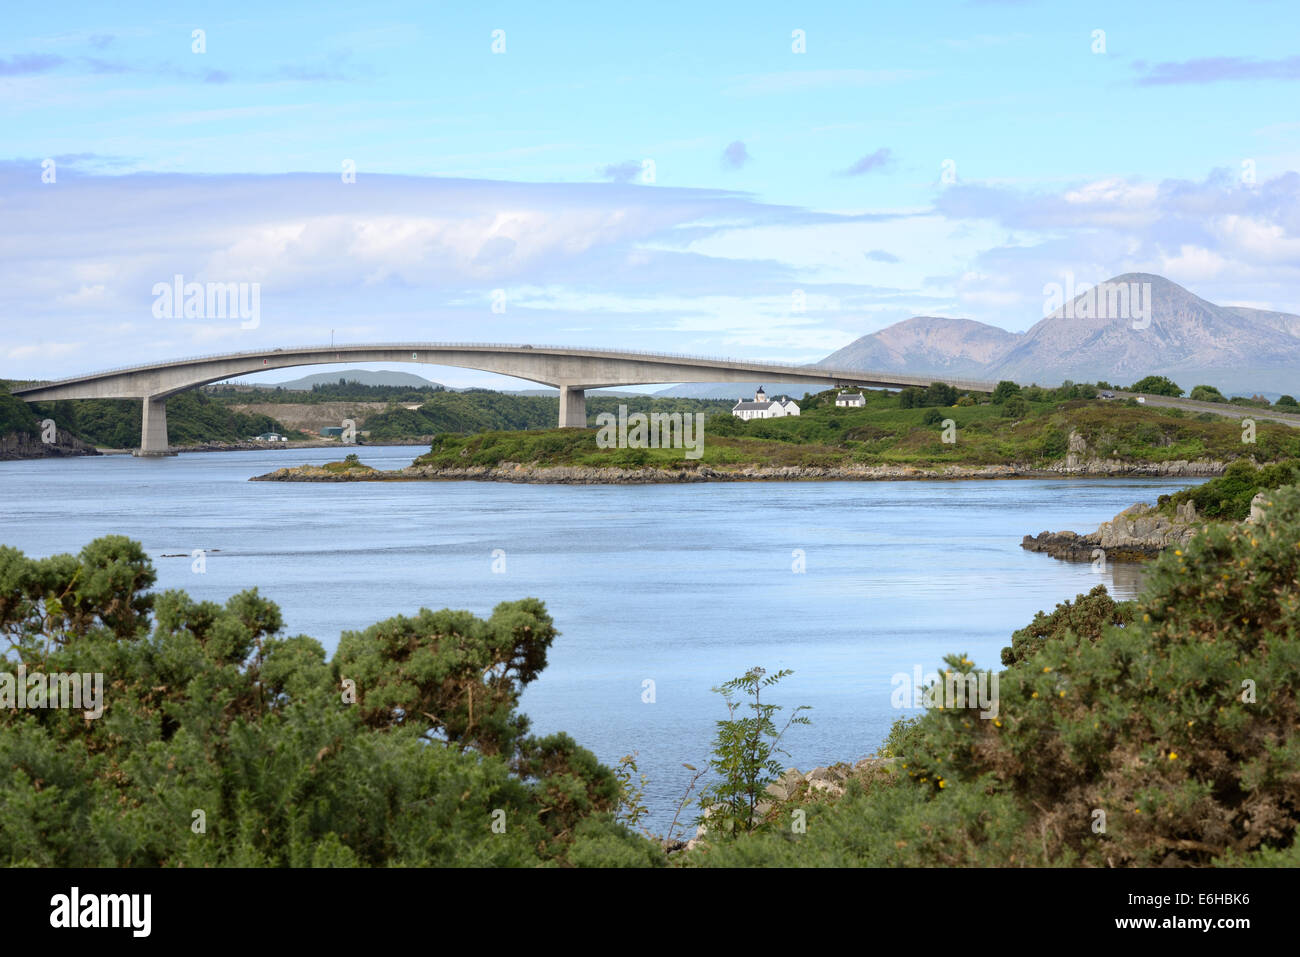 The Skye bridge at Kyle of Lochalsh joining the mainland of Scotland to the inner Hebridean island. Stock Photo